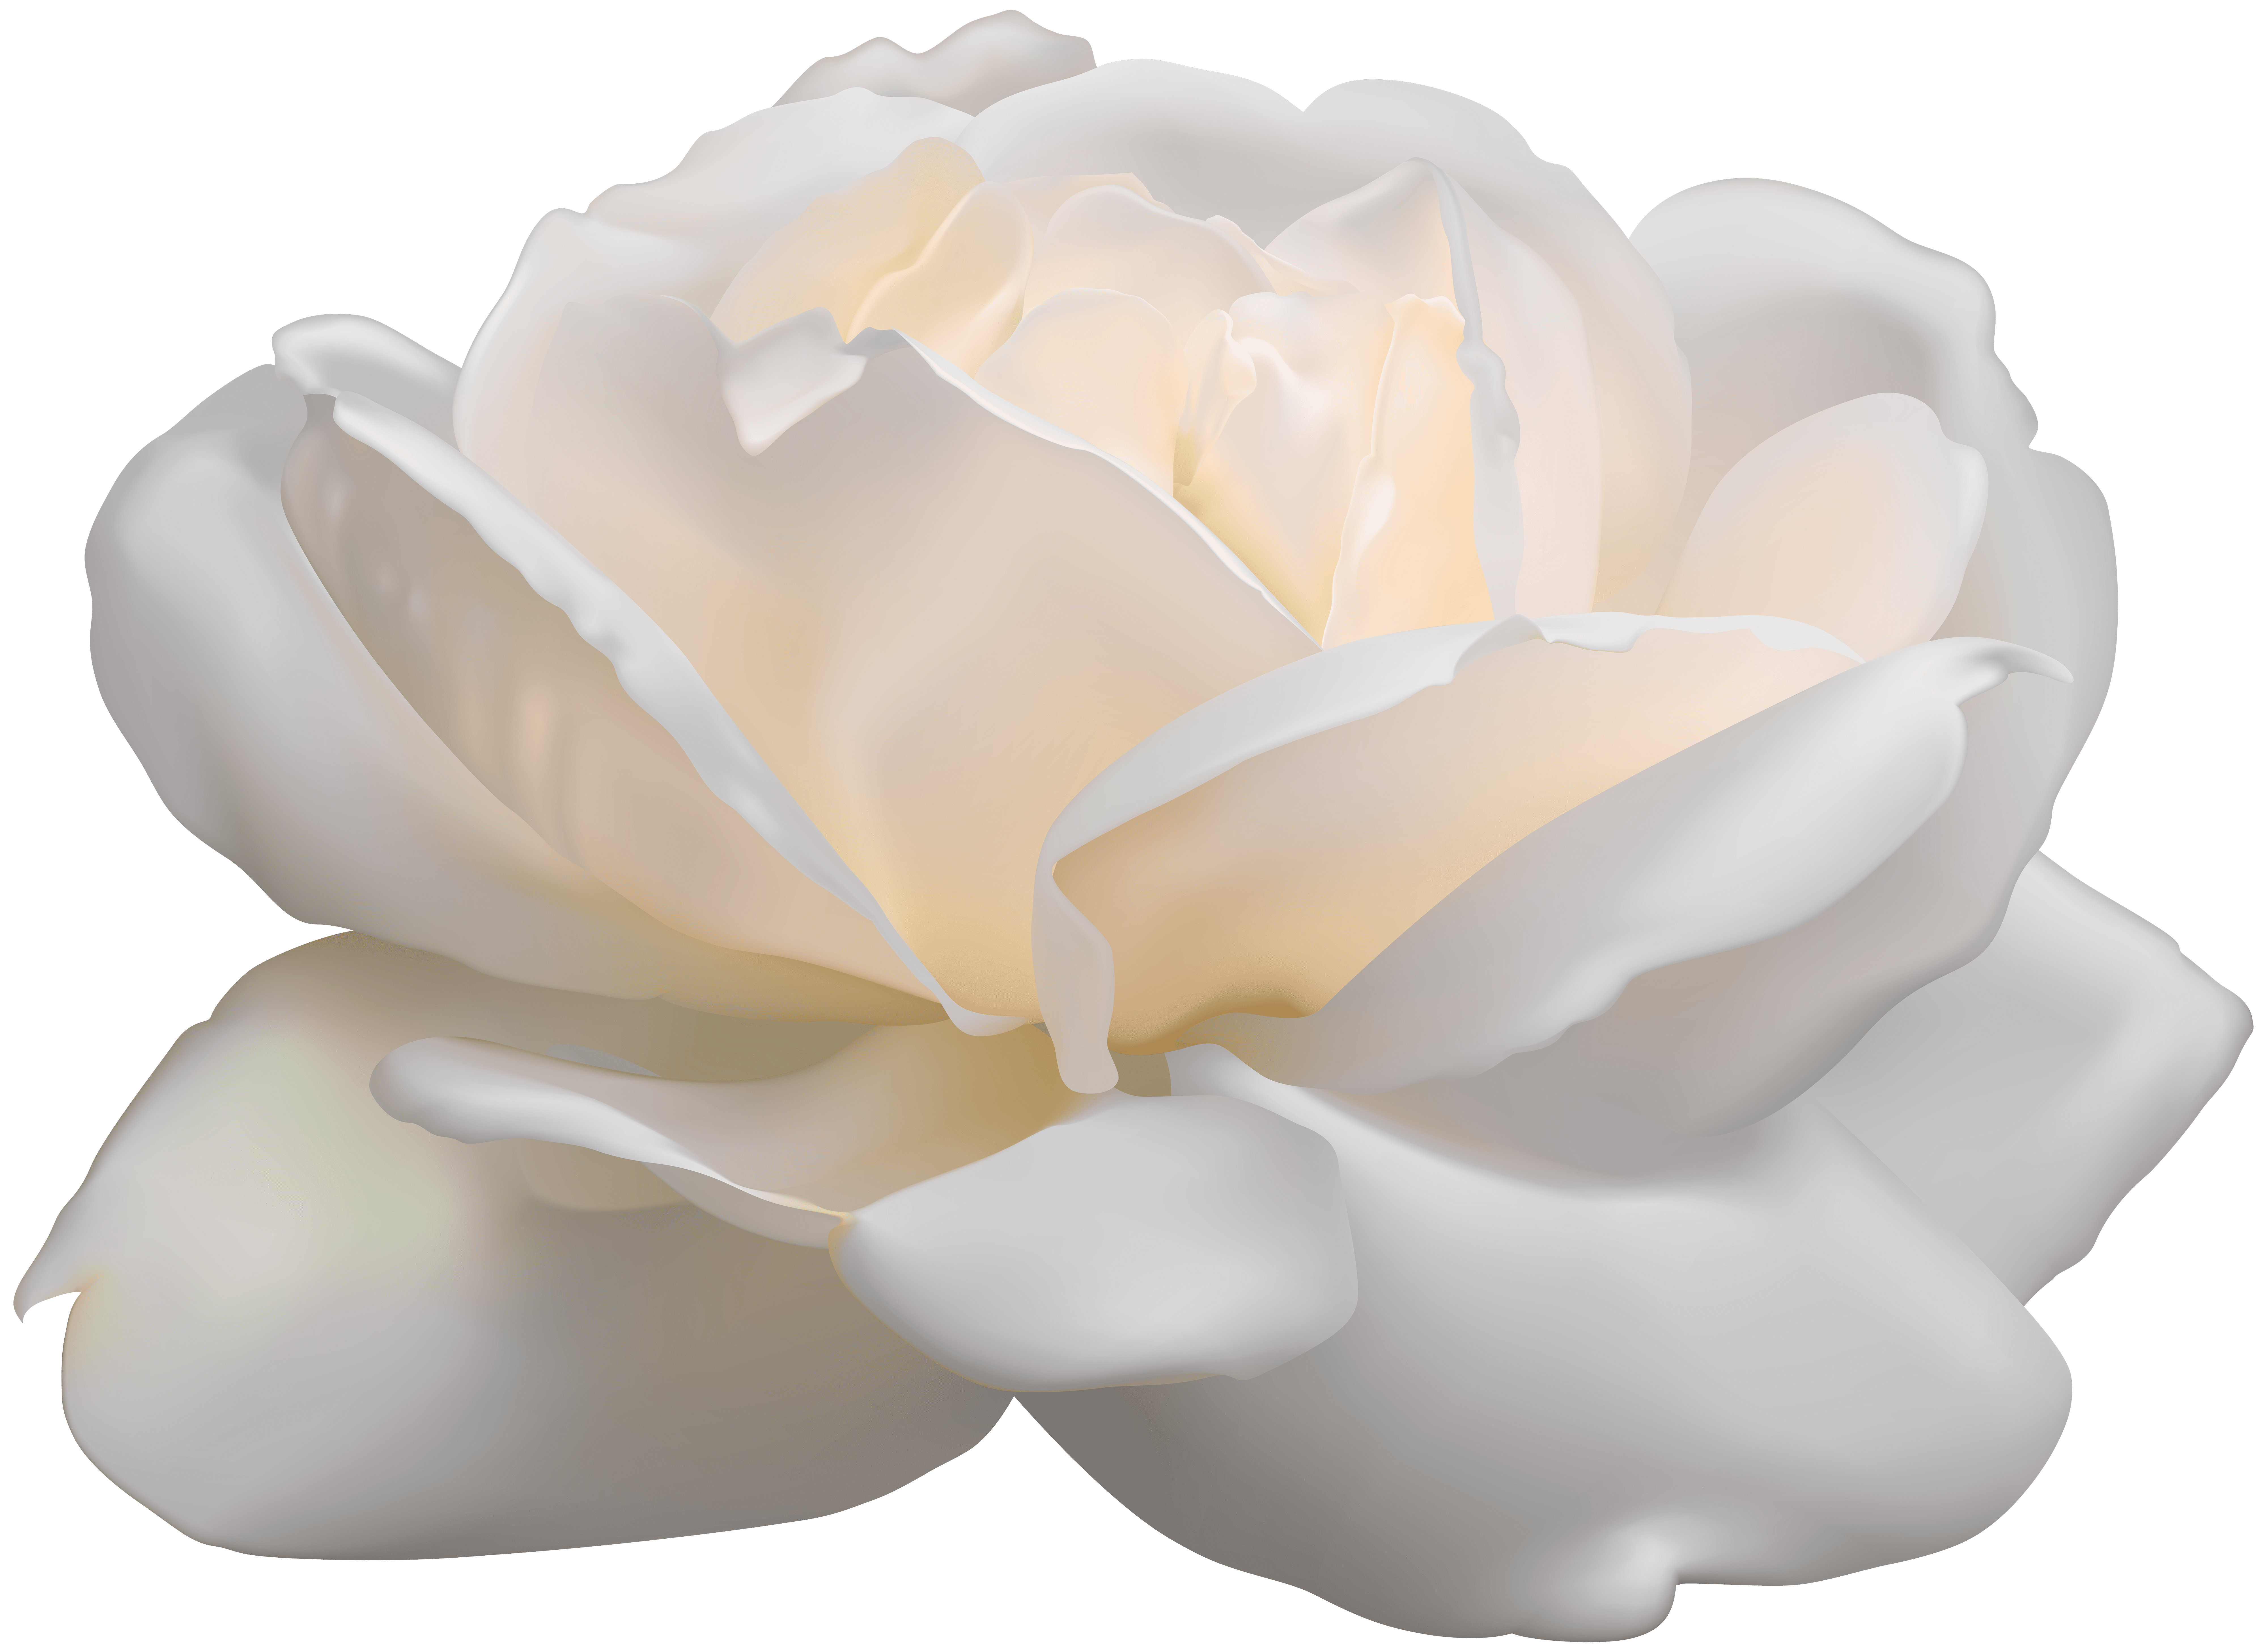 Aesthetic White Rose PNG High-Quality Image